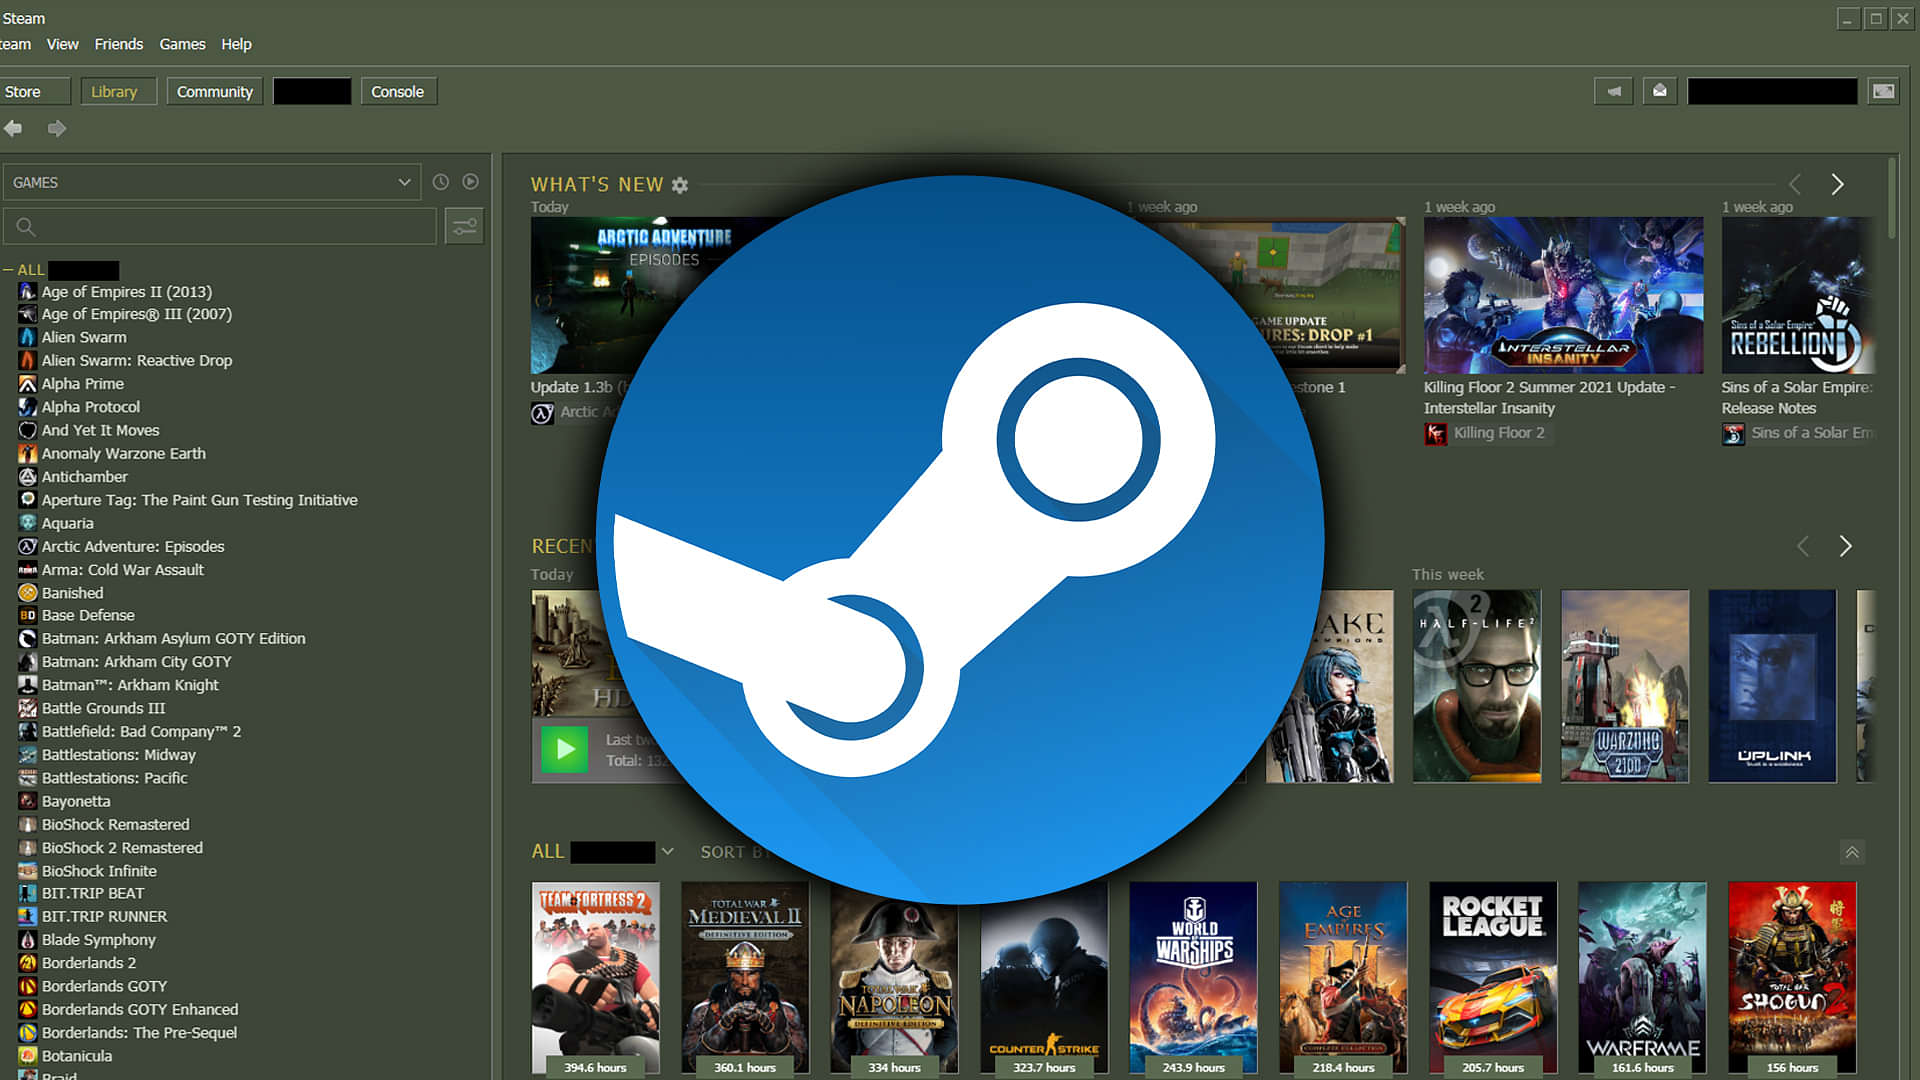 TIL Gaben has all the games on Steam on his account : r/Steam